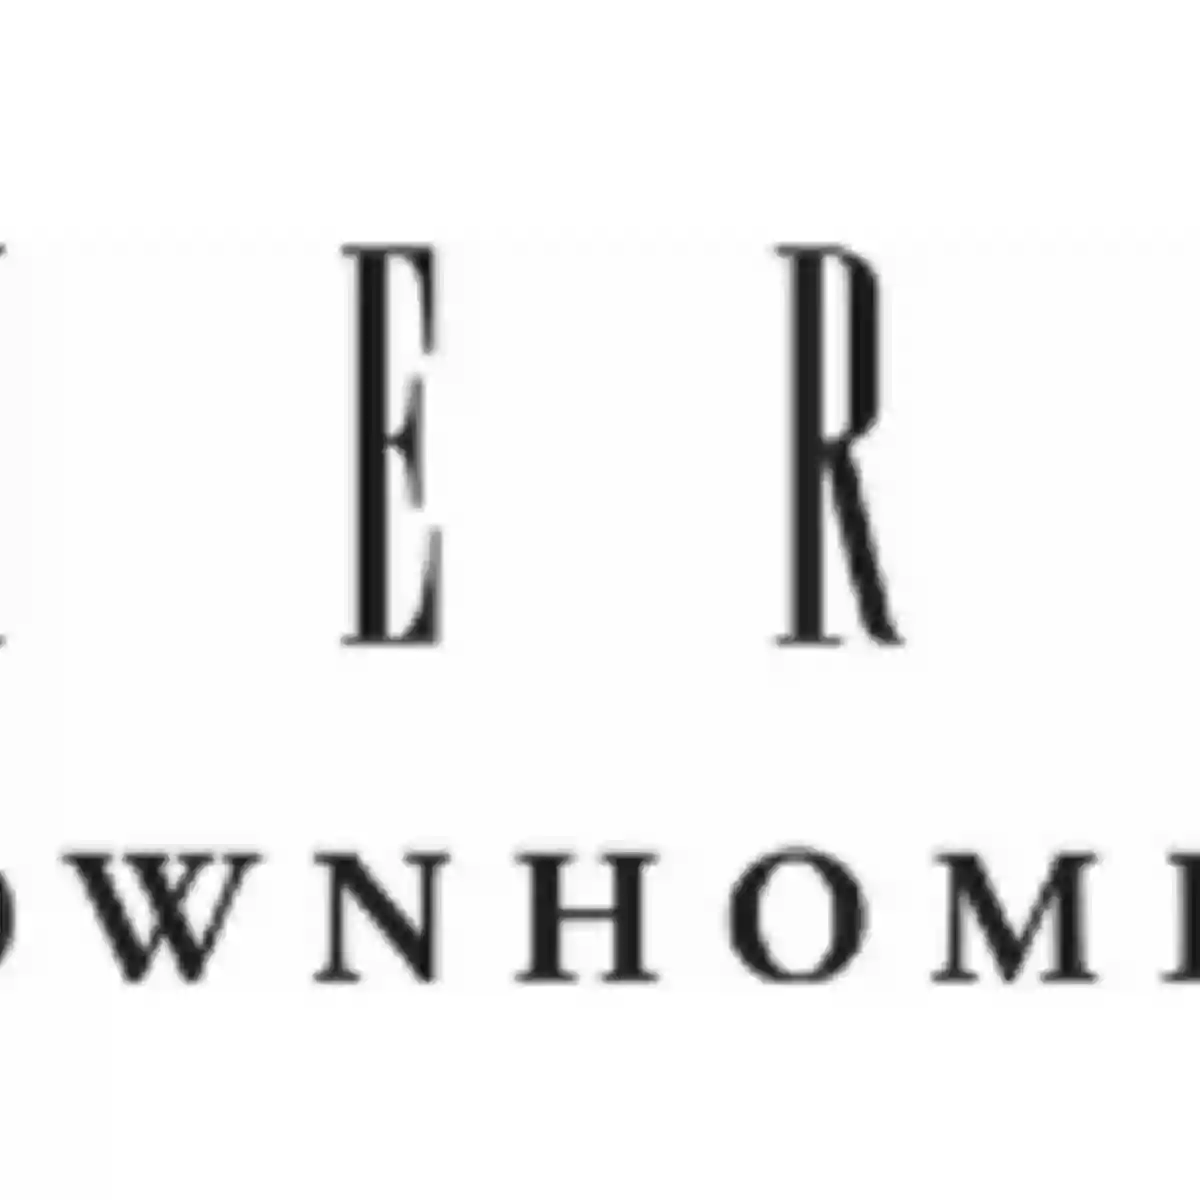 Somerset Townhomes